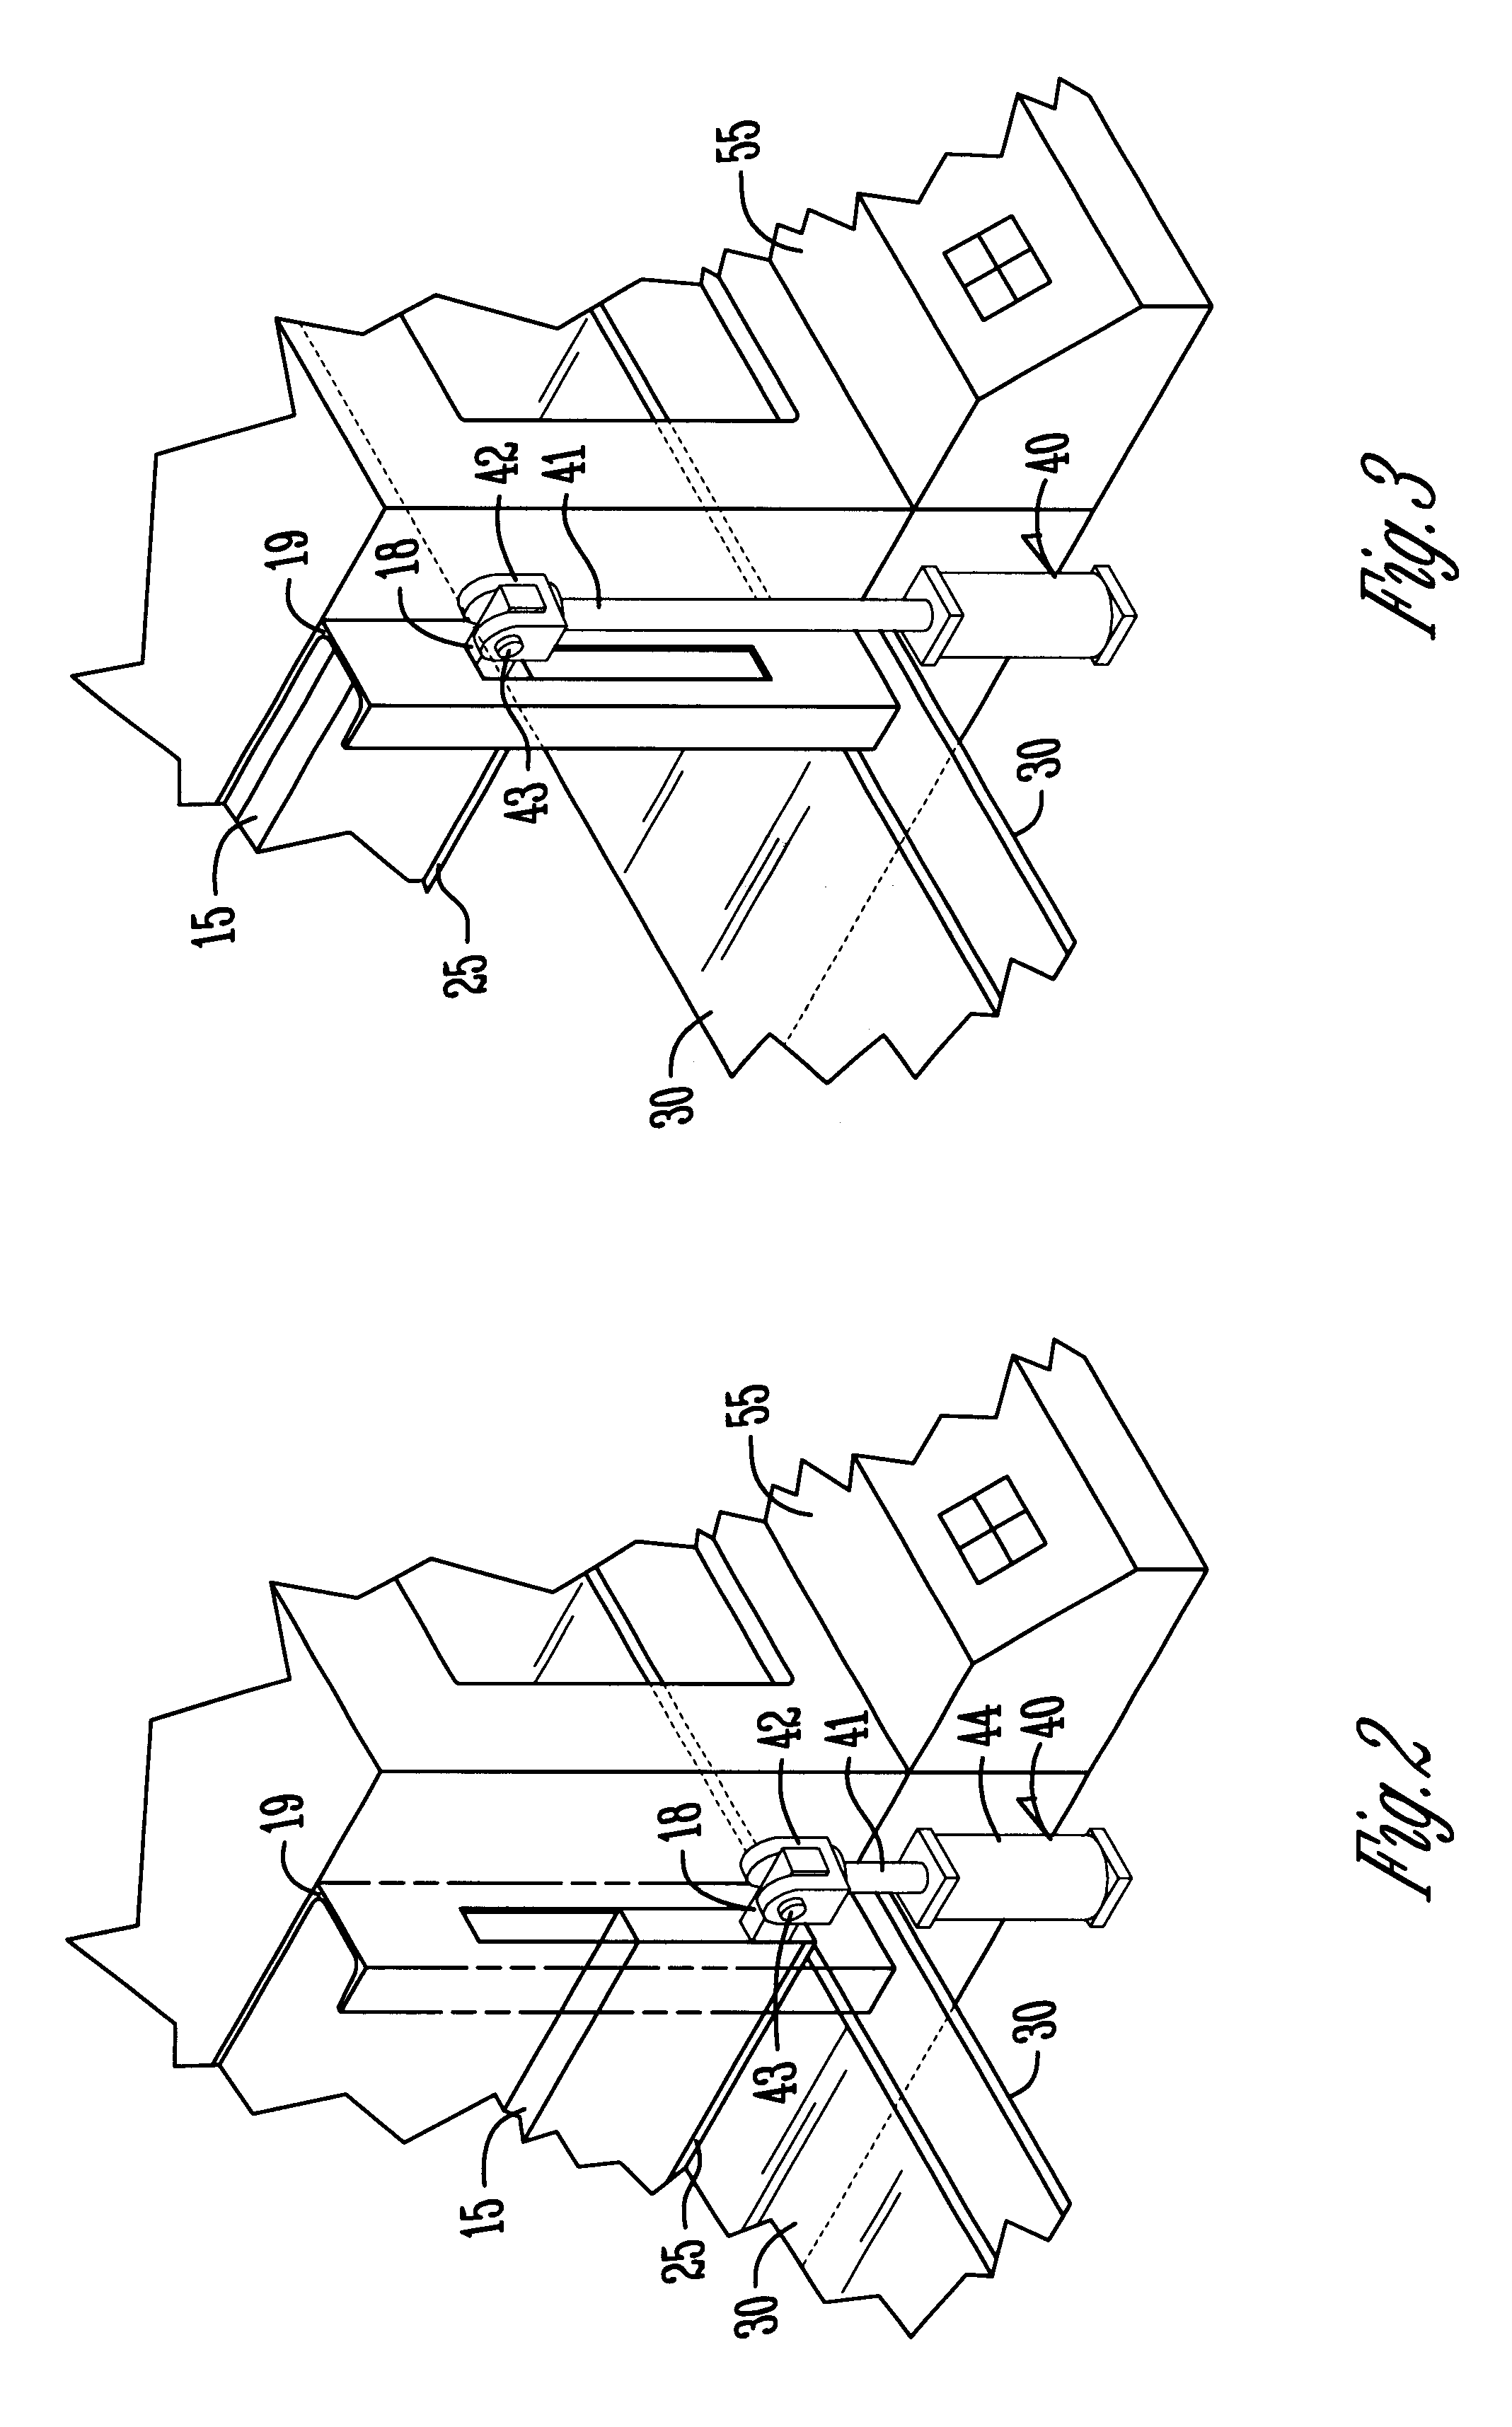 Conveyorized oven with automated door